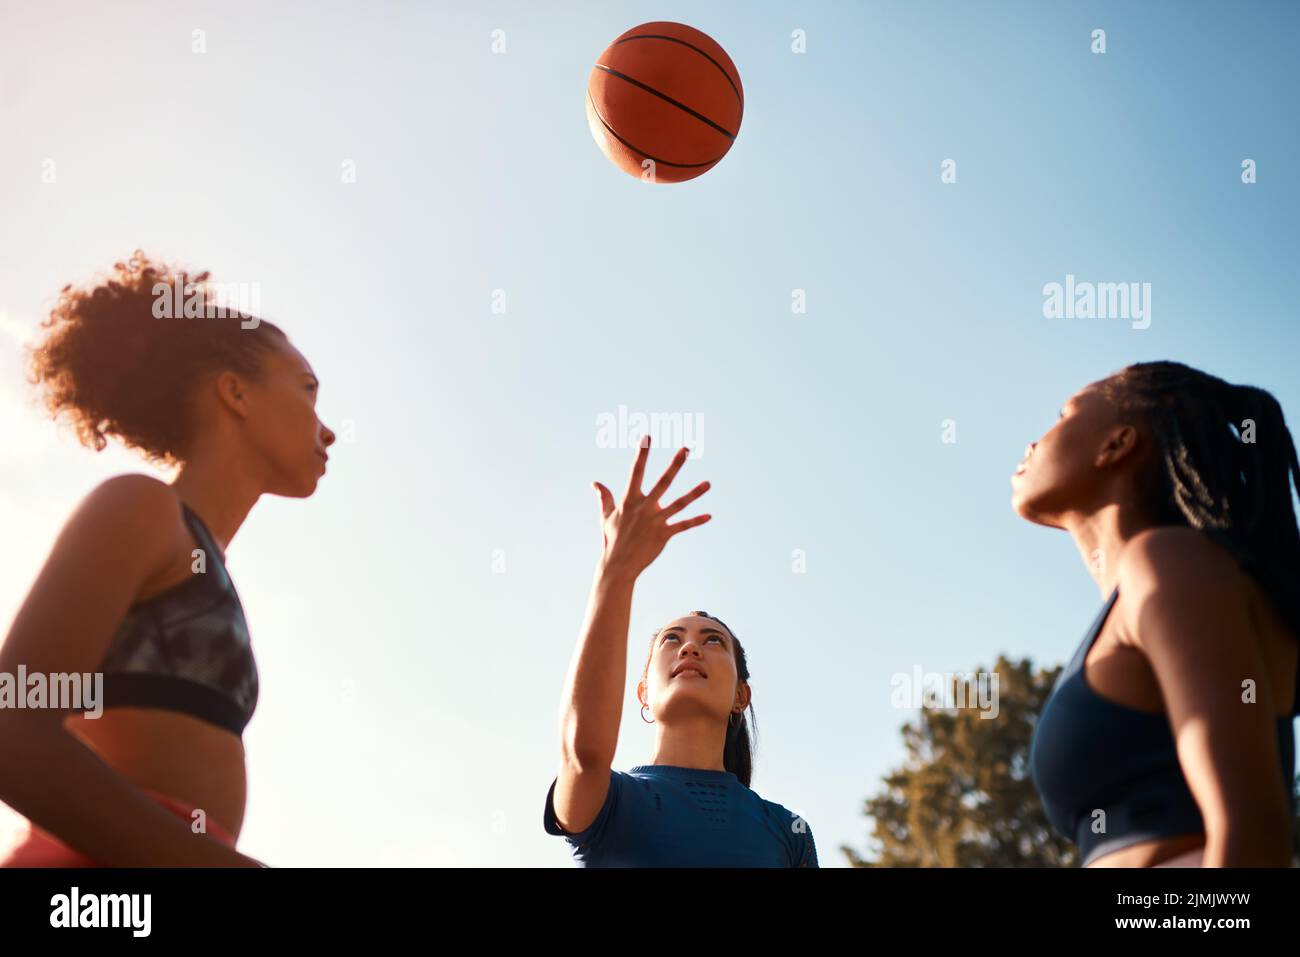 First one to get the ball starts. a diverse group of sportswomen playing a competitive game of basketball together during the day. Stock Photo